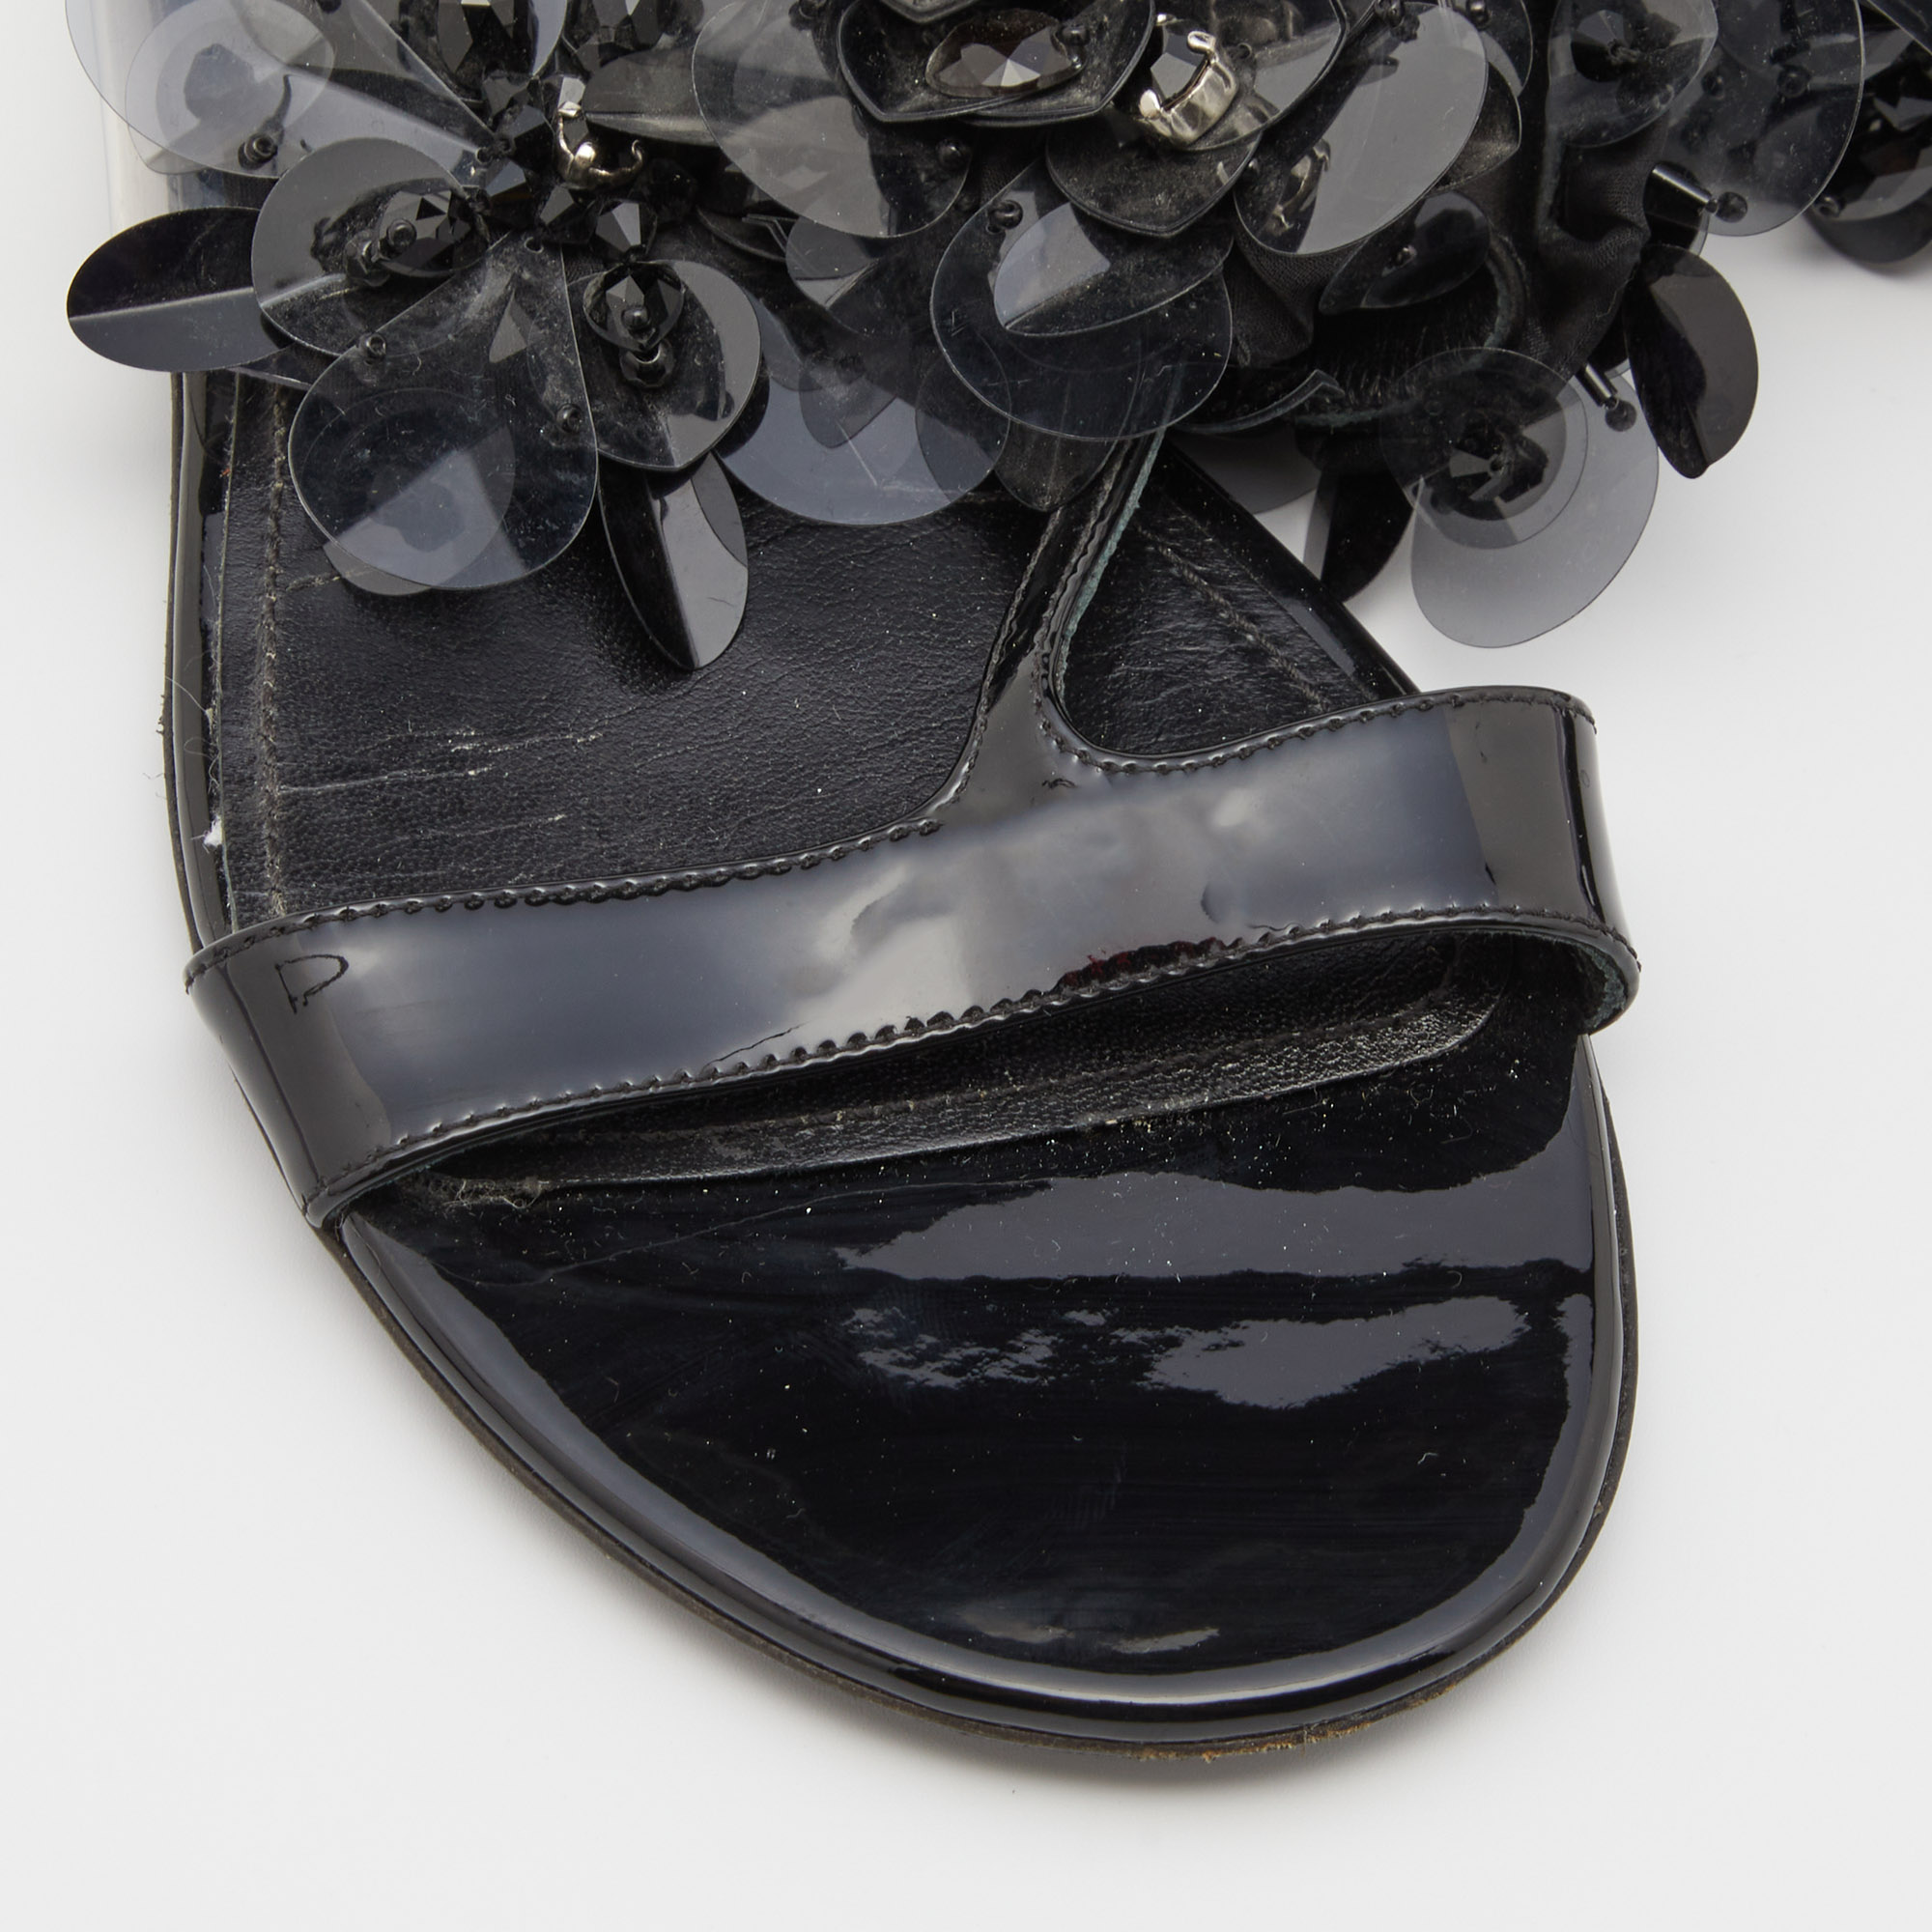 Prada Black Patent Leather And PVC Crystal/Beads Embellished Flat Sandals Size 38